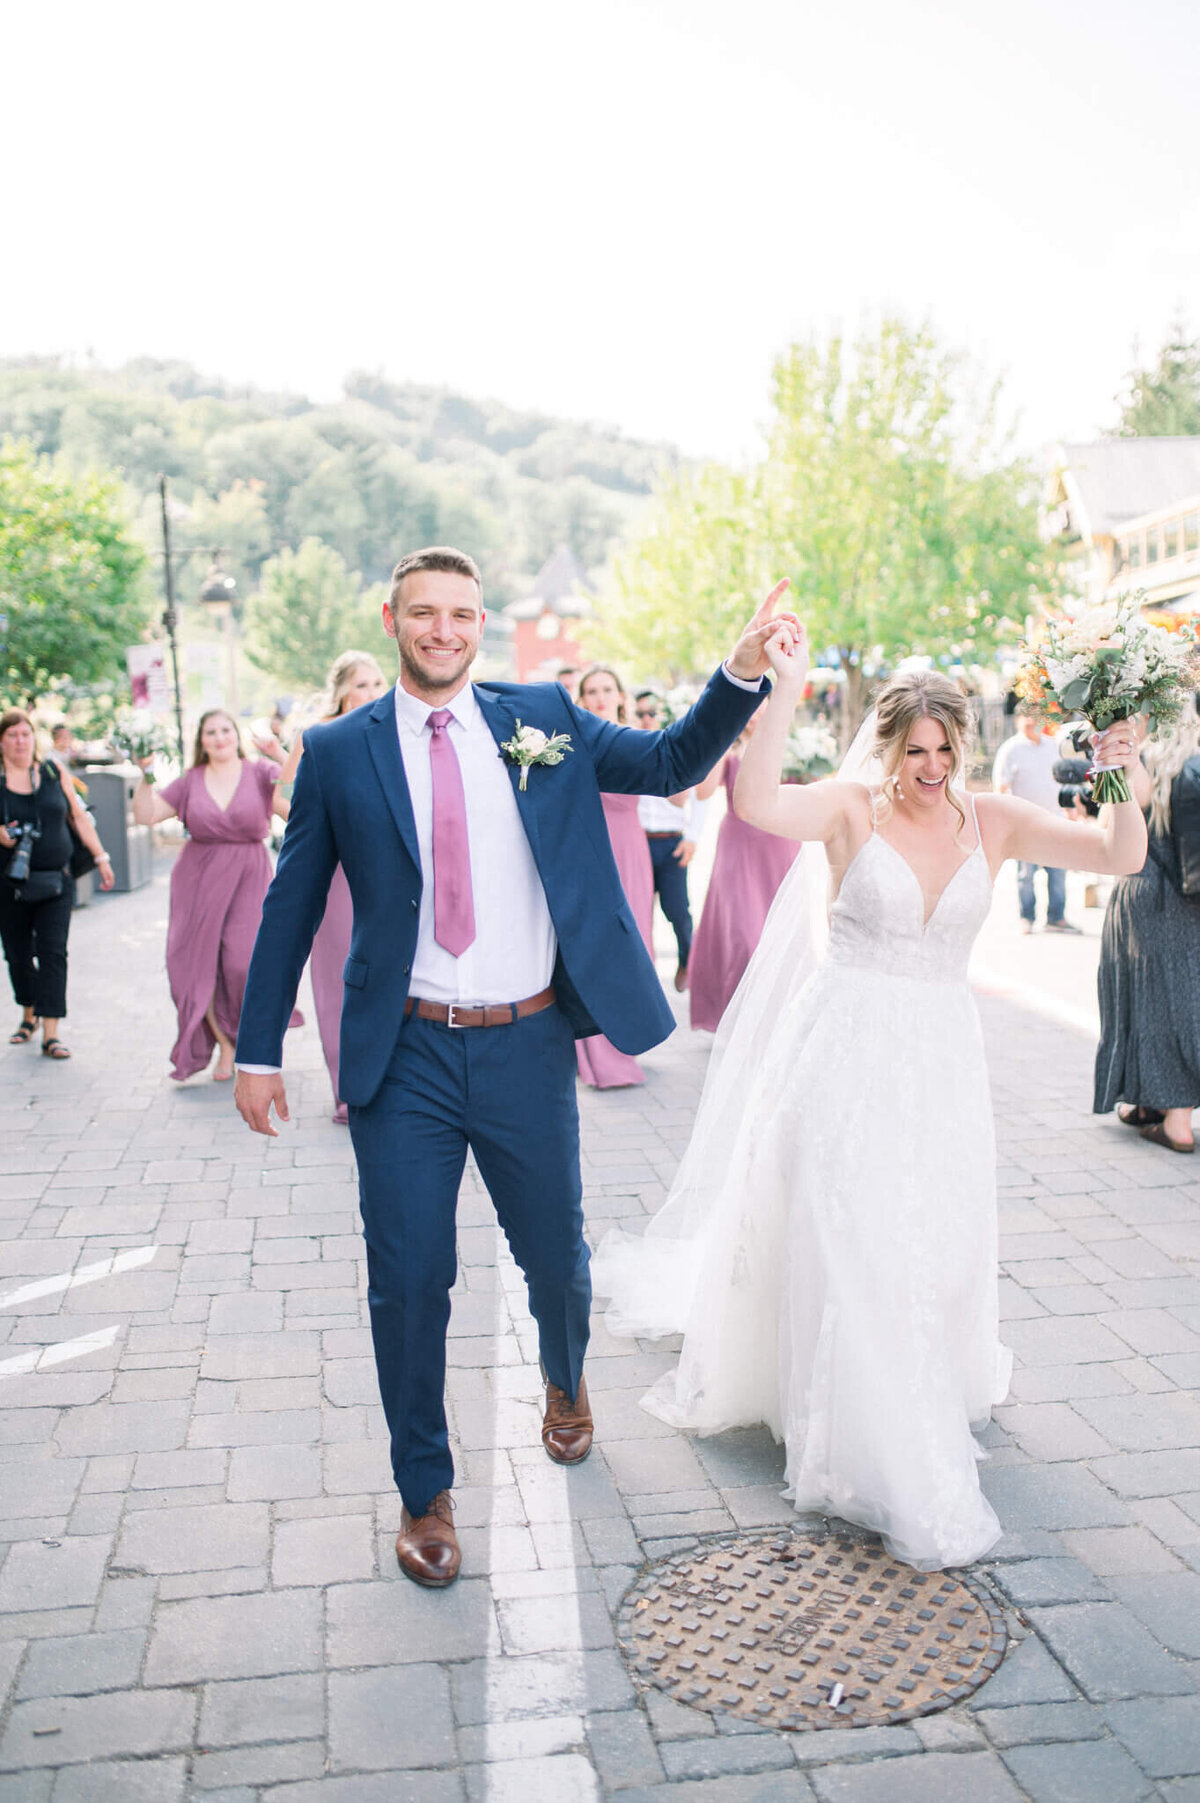 Bride and groom walking down path with arms held high captured by Niagara wedding photographer